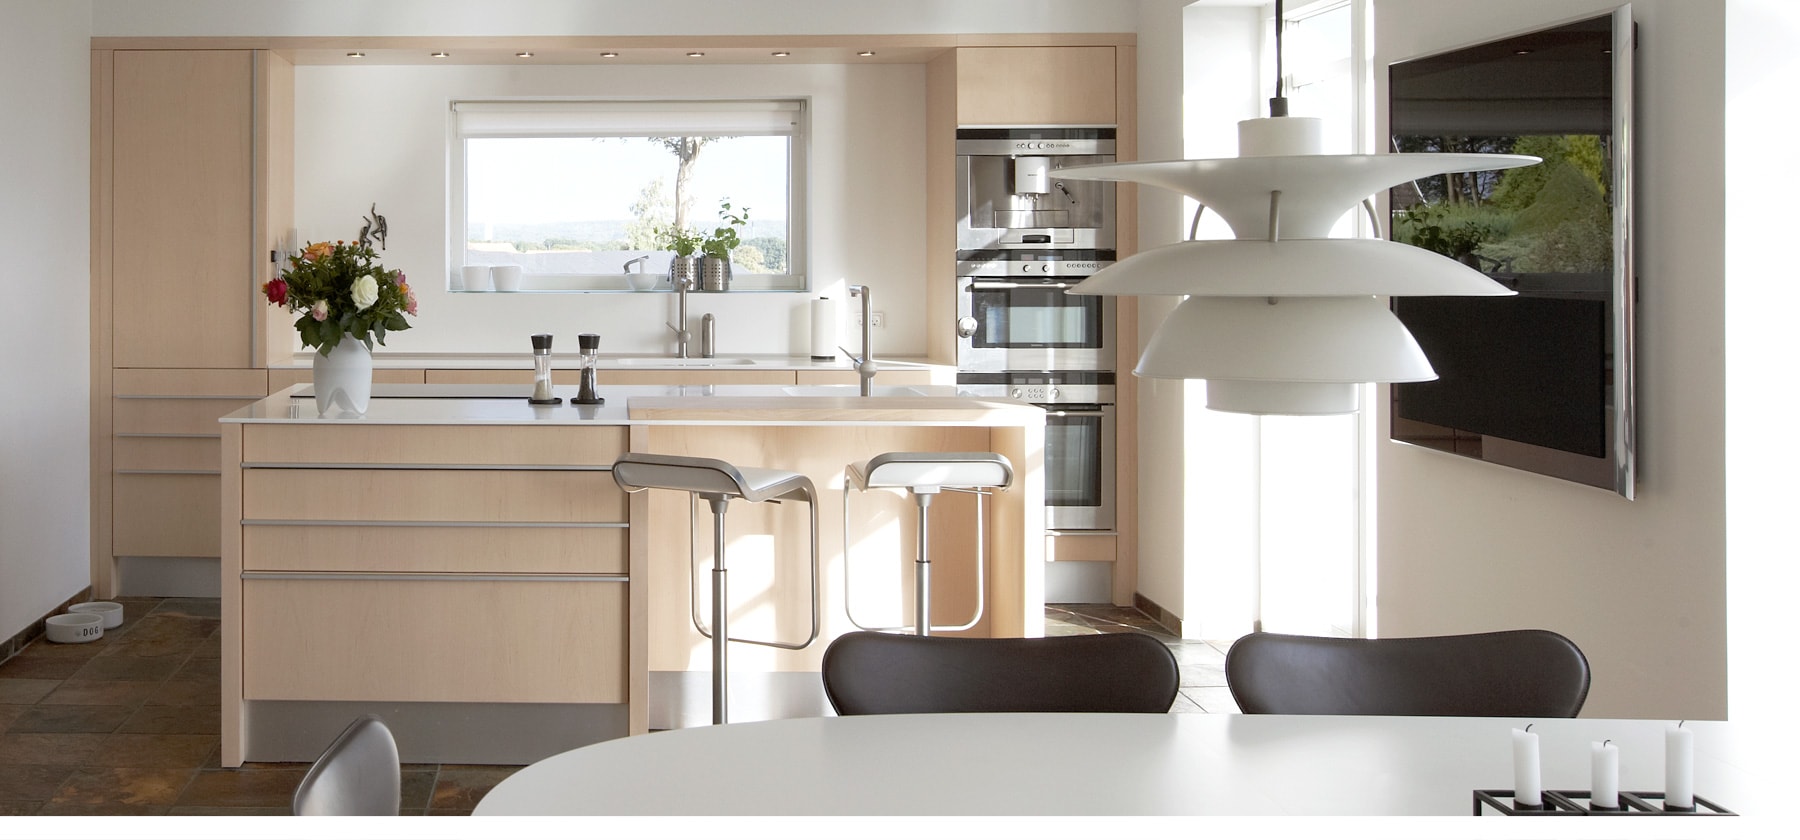 Exclusive Nordic kitchen designDAILY LUXURY <br> IN ALL ITS SIMPLICITY